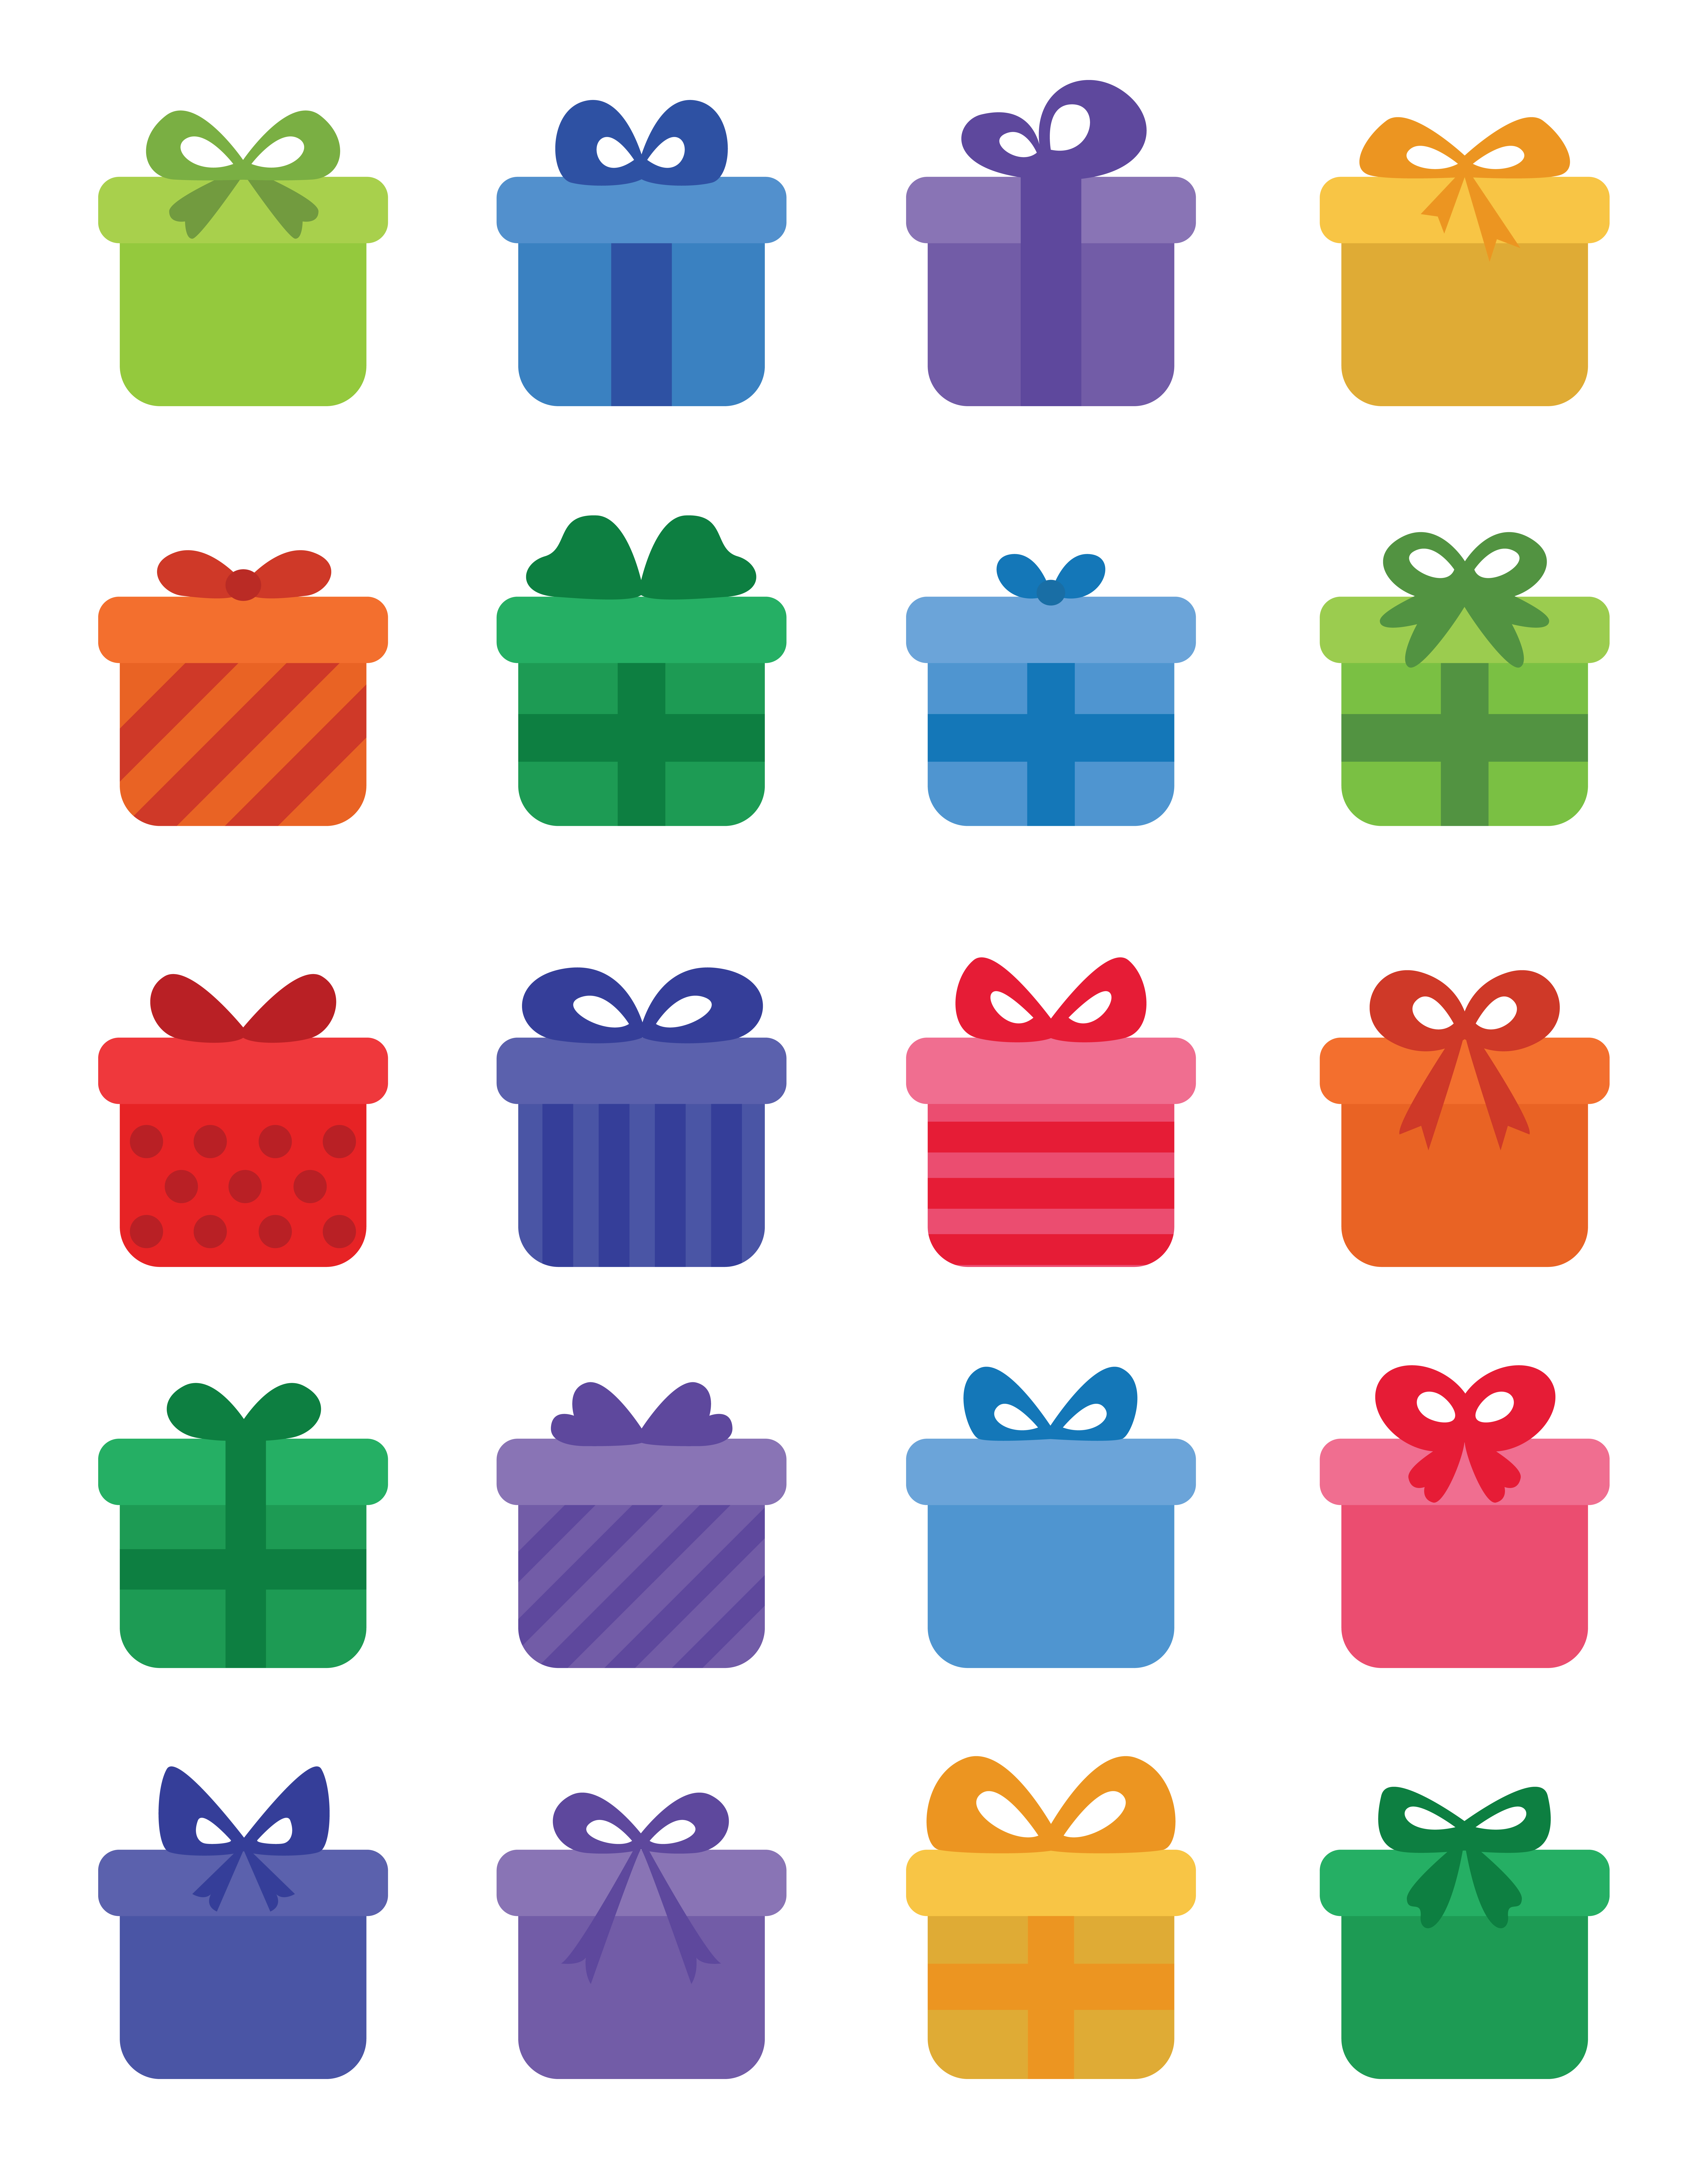 Group of colorful boxes with bows on them.